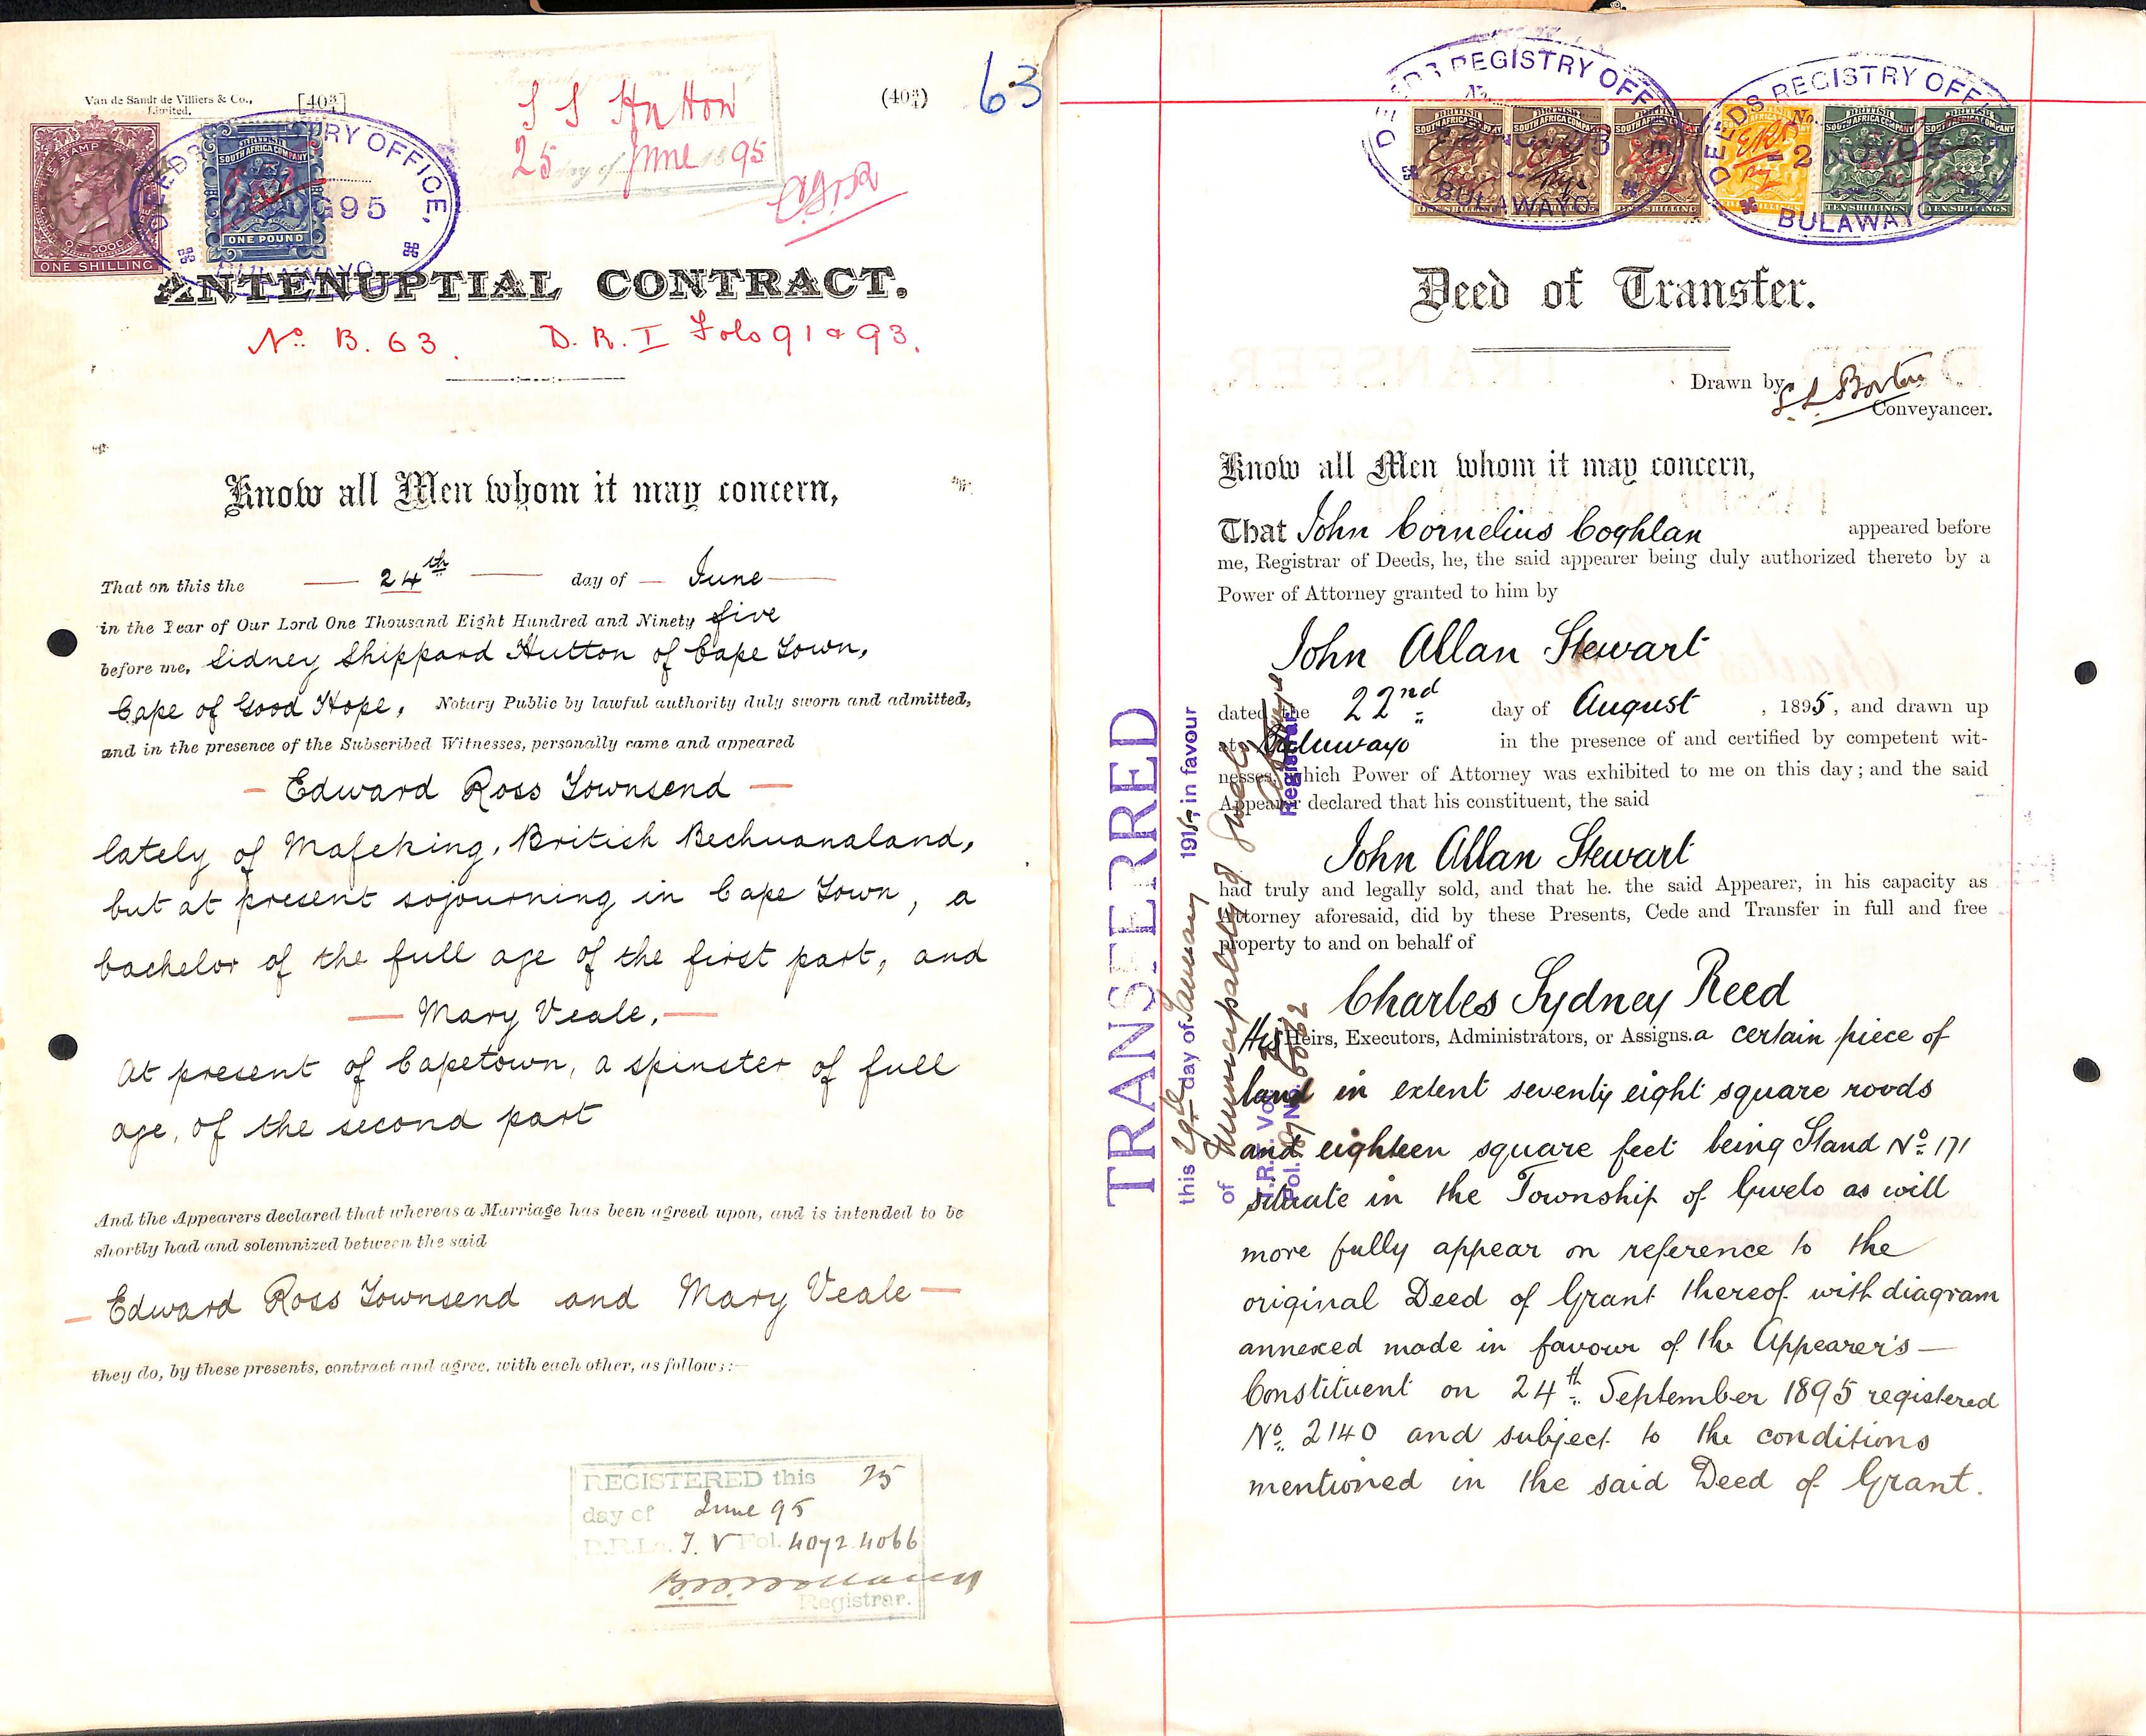 1895-1903 Legal documents comprising Deeds of Transfer (21), Mortgages (4) and prenuptial marriage